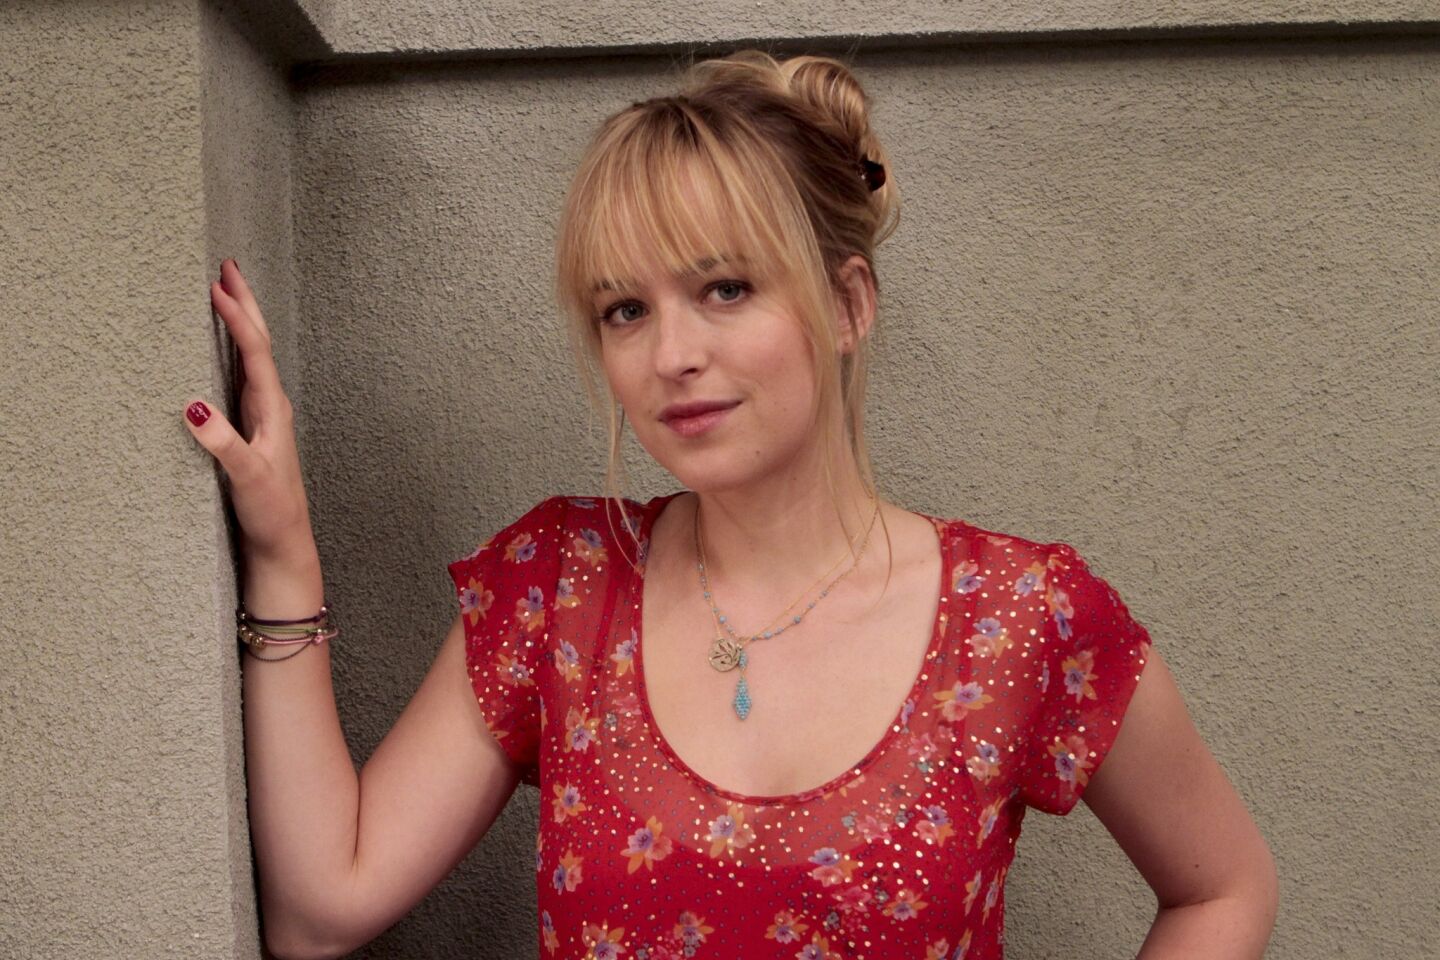 Johnson plays young college grad and bookworm Anastasia Steele. You might have also seen her in "Ben and Kate," "The Five-Year Engagement," "The Social Network," and "Beastly."